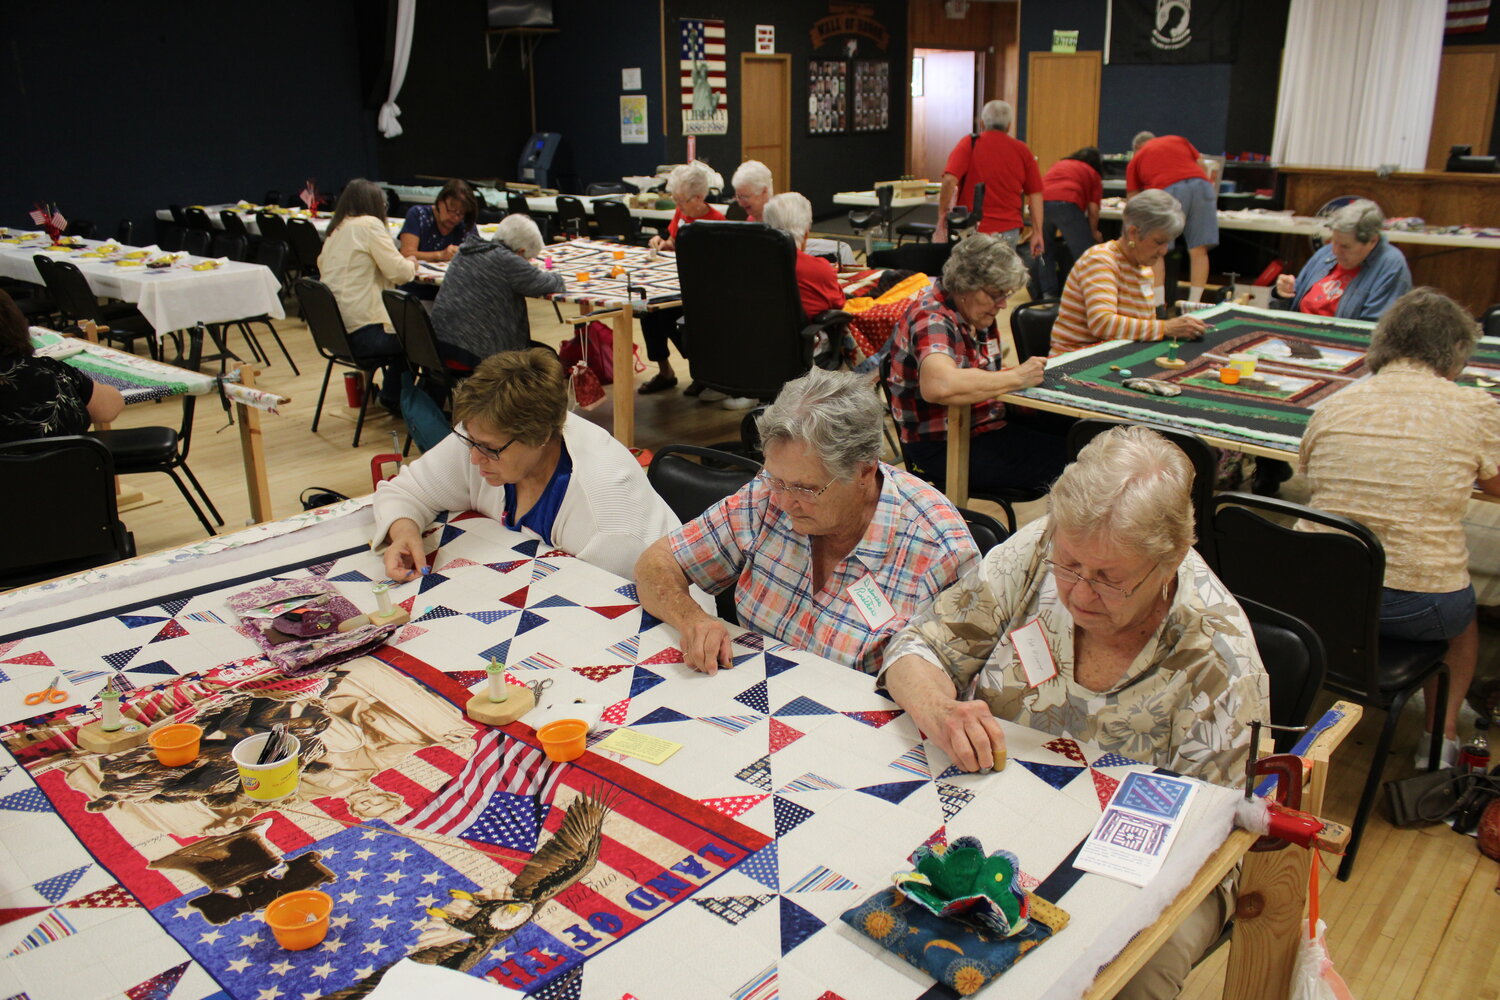 A patriotic quilt is being put together by women who are a part of Quilts of Valor Eastern Missouri.